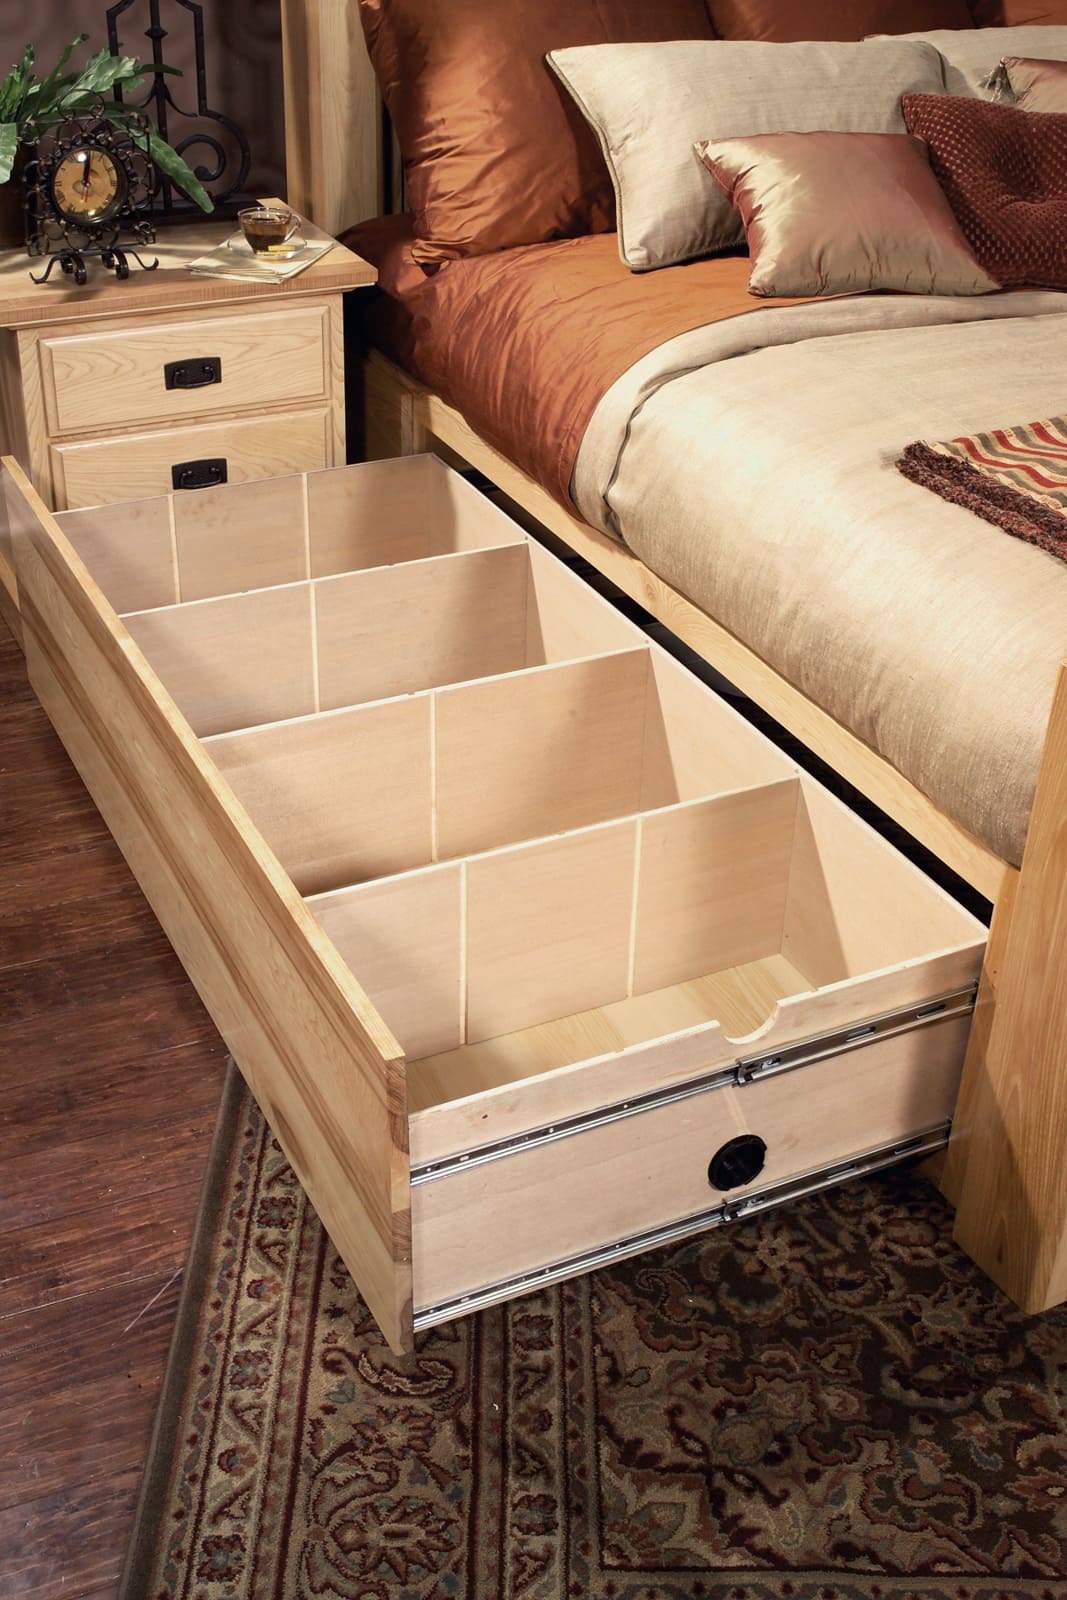 23 creative storage bed ideas to add to your bag - 181